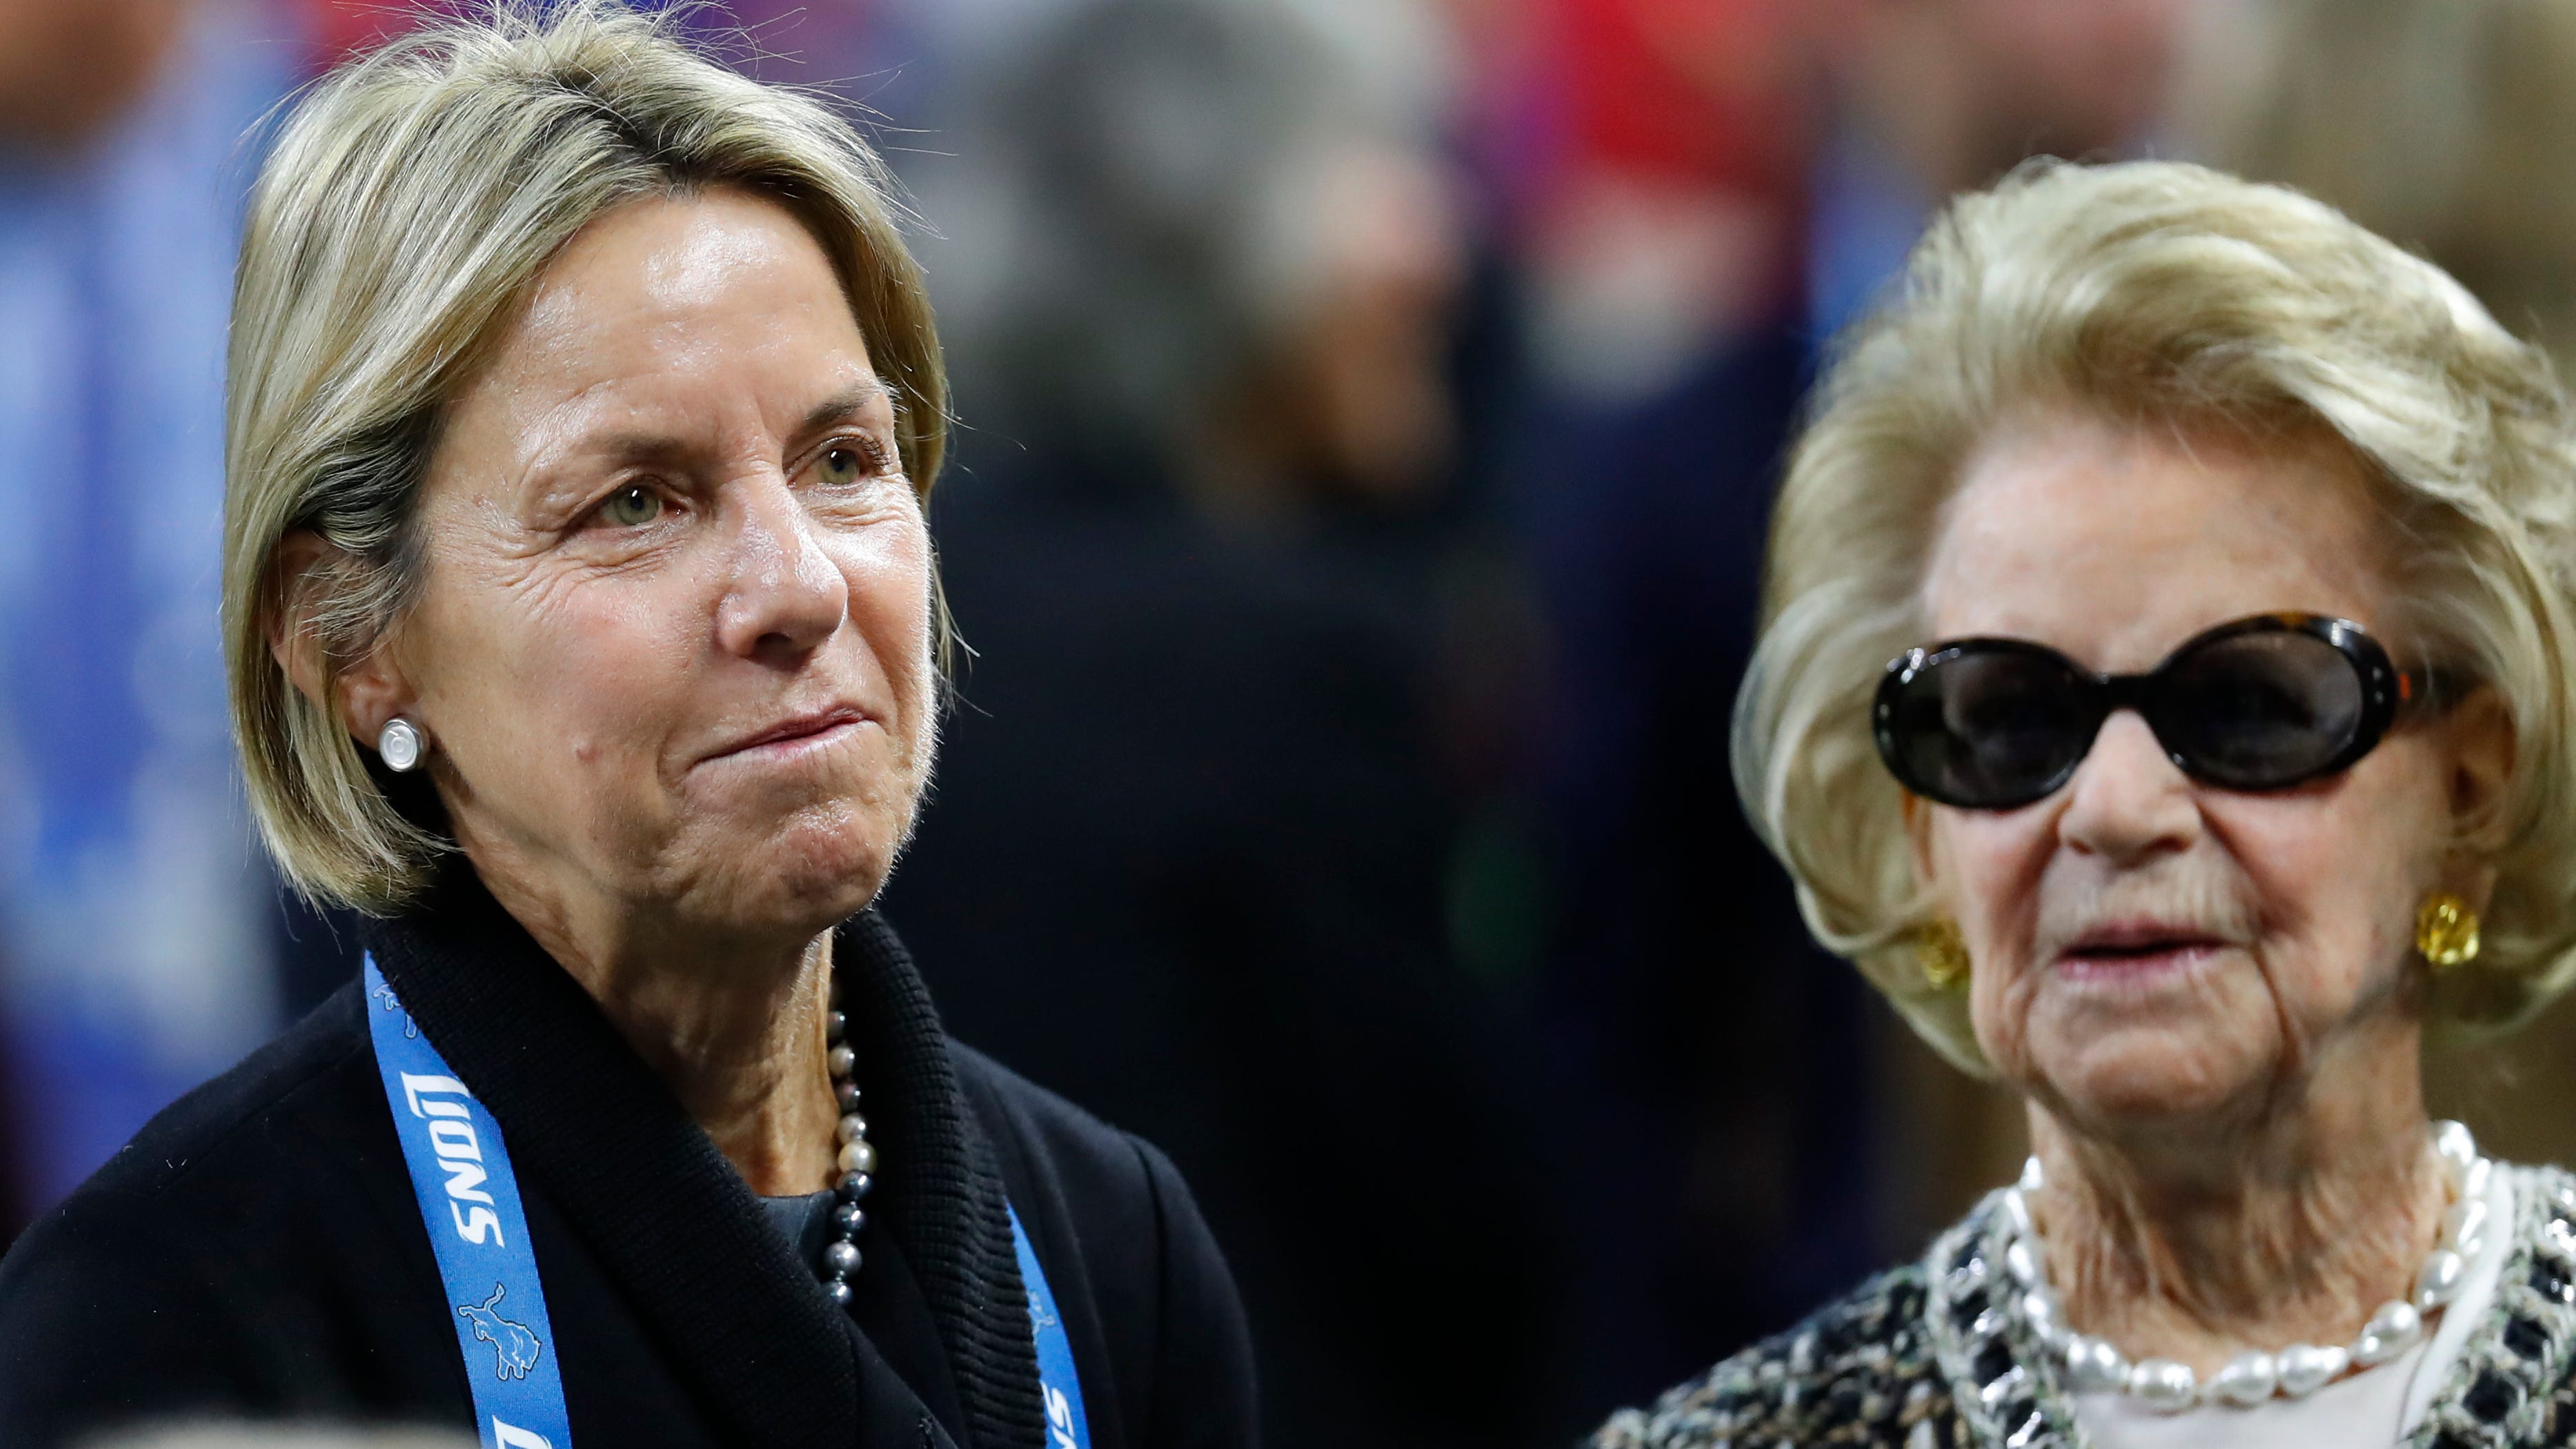 Sheila Ford Hamp, then-Detroit Lions Vice Chair, talks with Martha Ford, former owner, before a game against the Minnesota Vikings in Detroit in 2016.